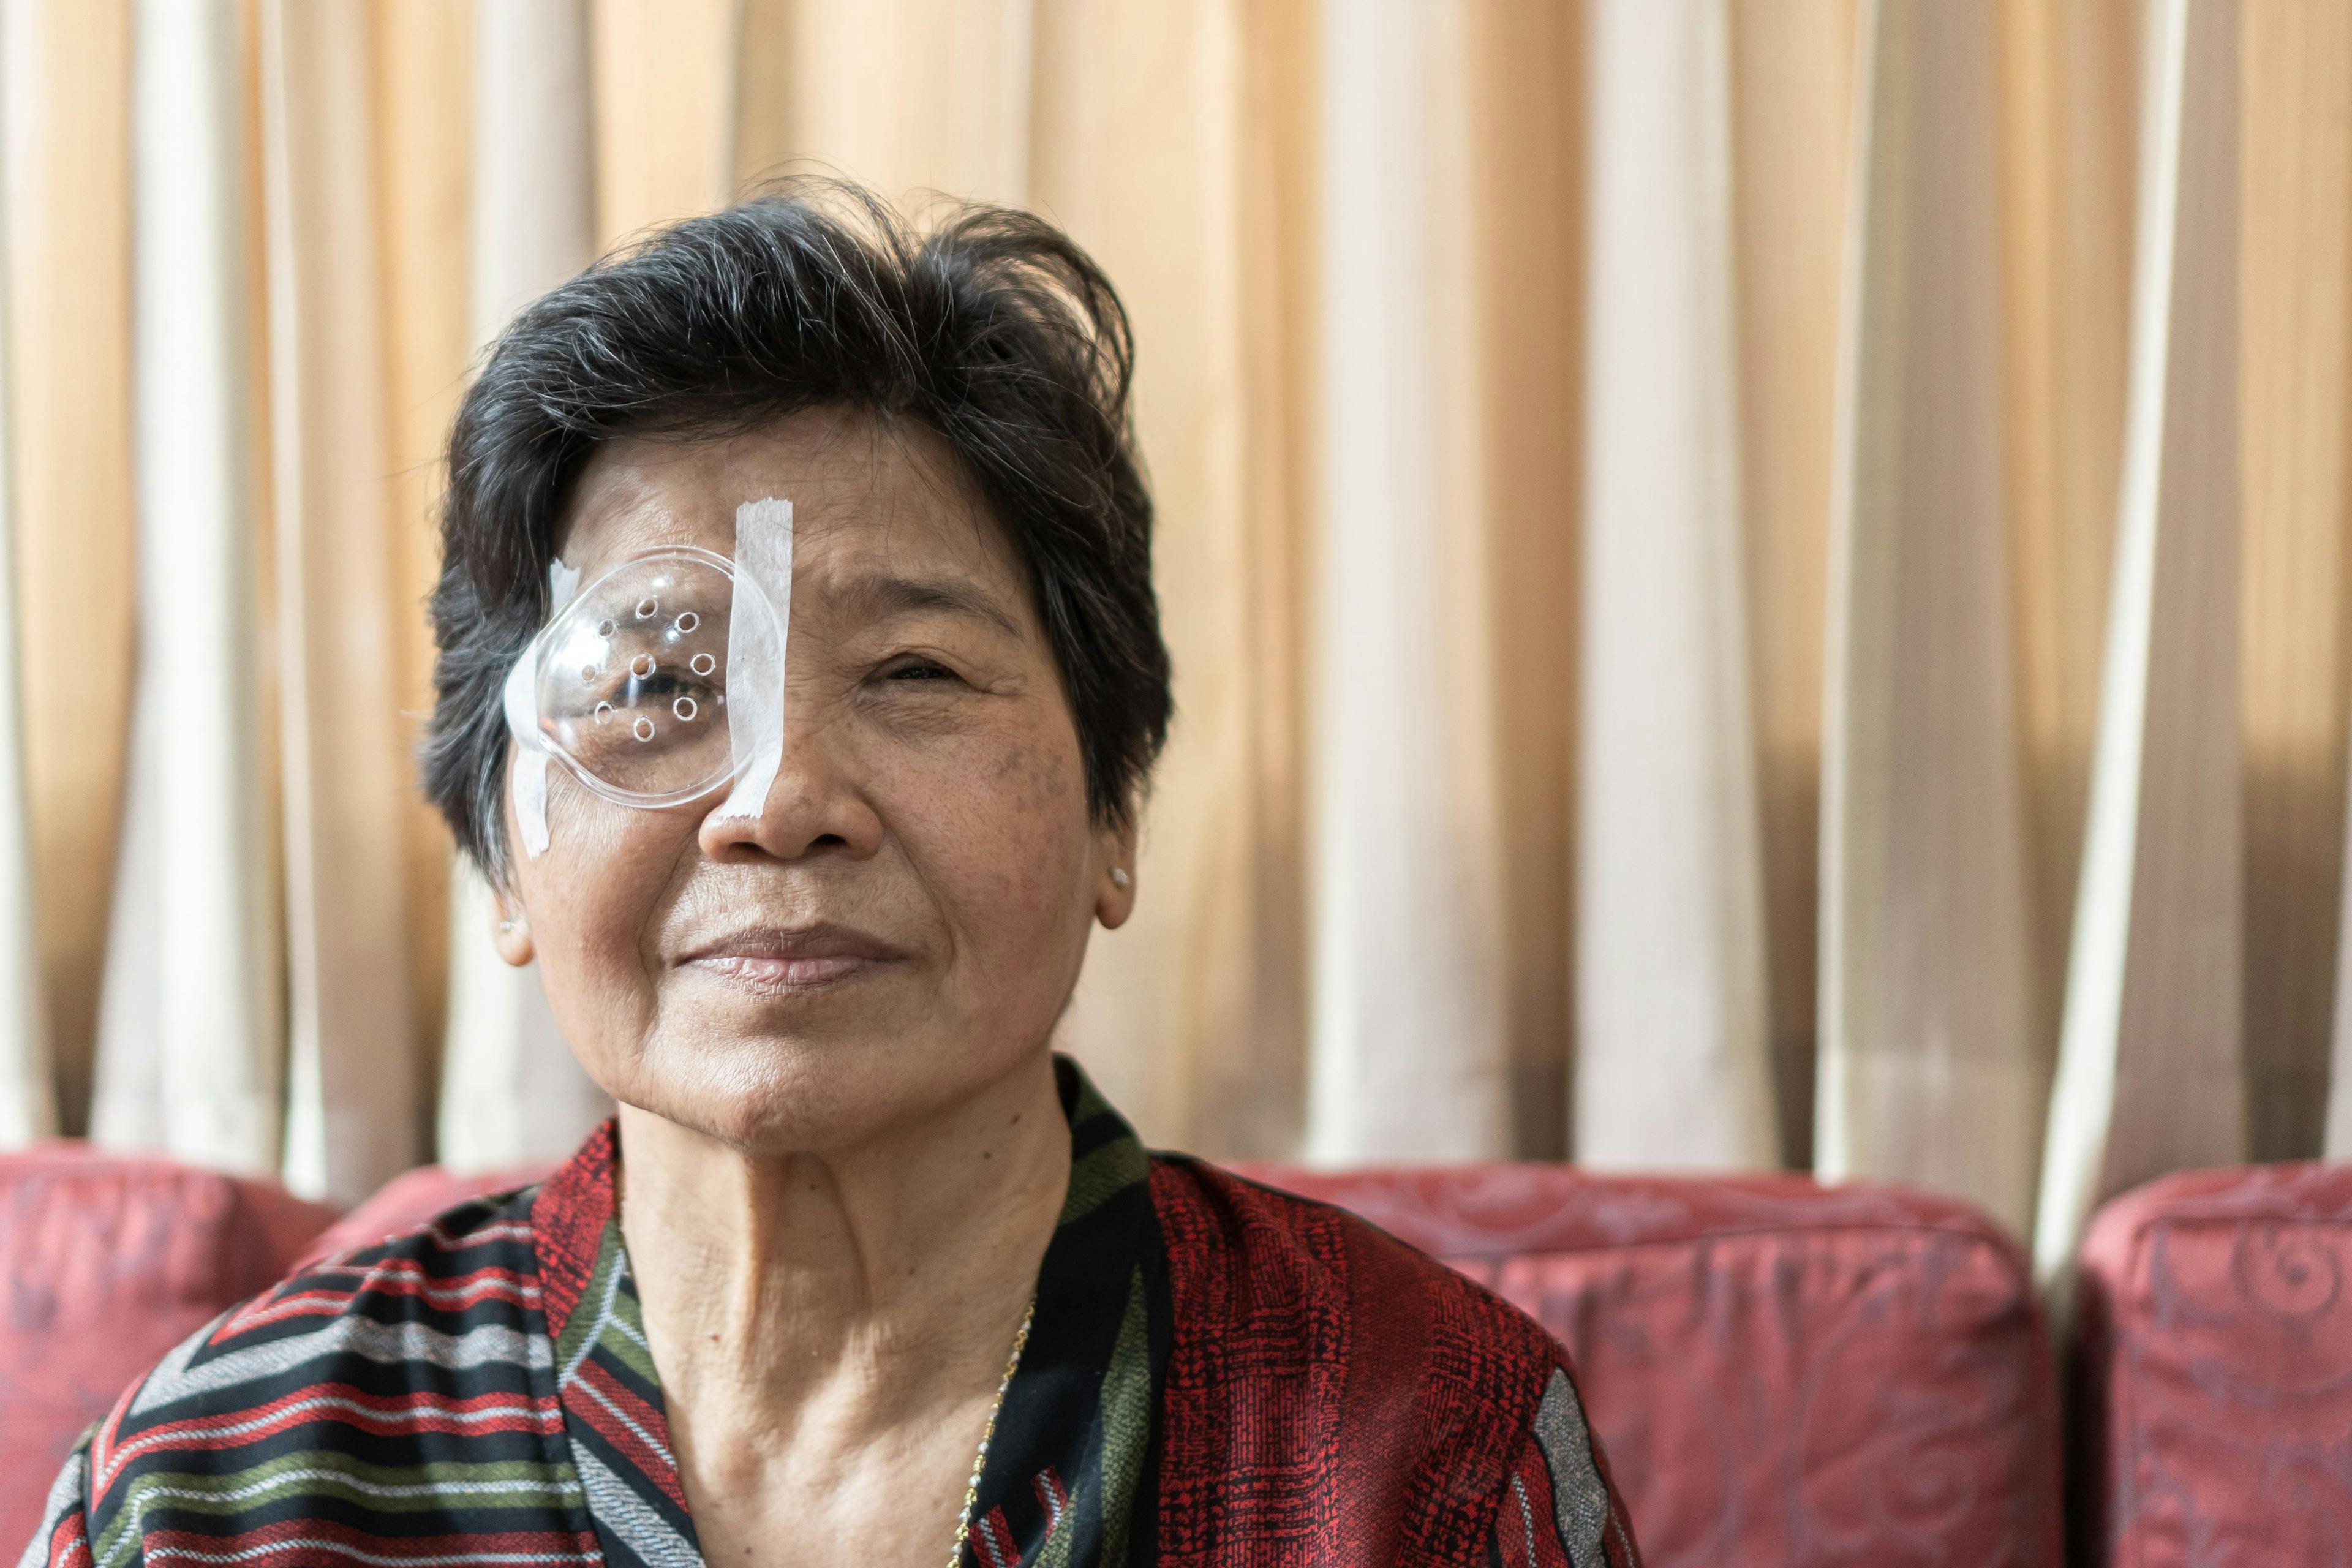 Elder Asian woman with eye care treatment | Image Credit: Chinnapong - stock.adobe.com